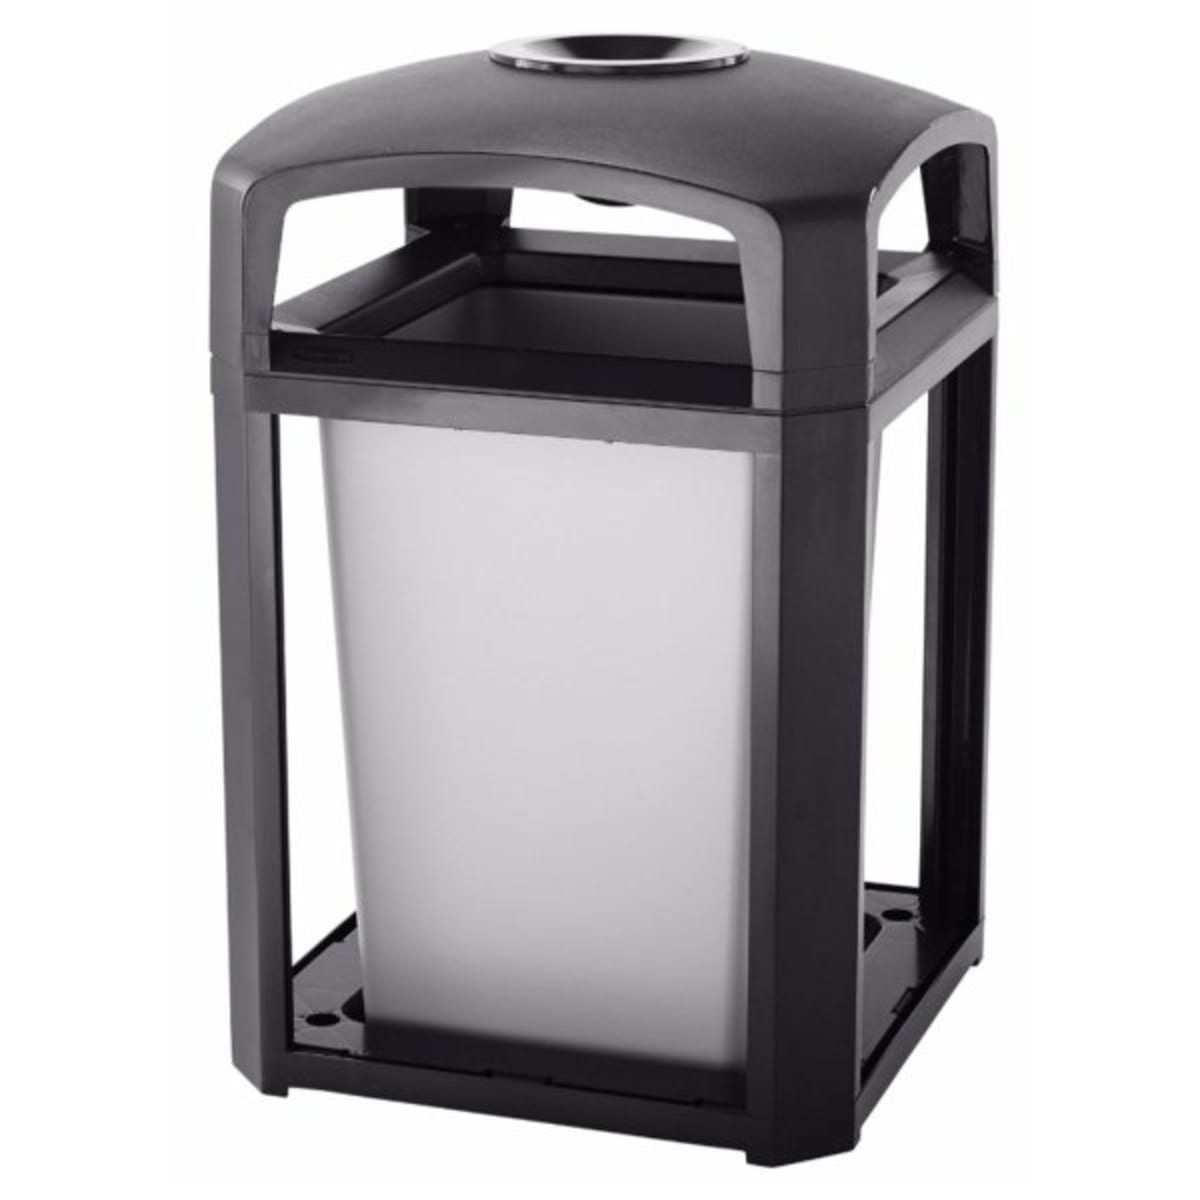 Perforated Metal Office Trash Can Esenia , 12L - 6422-12 - Pro Detailing